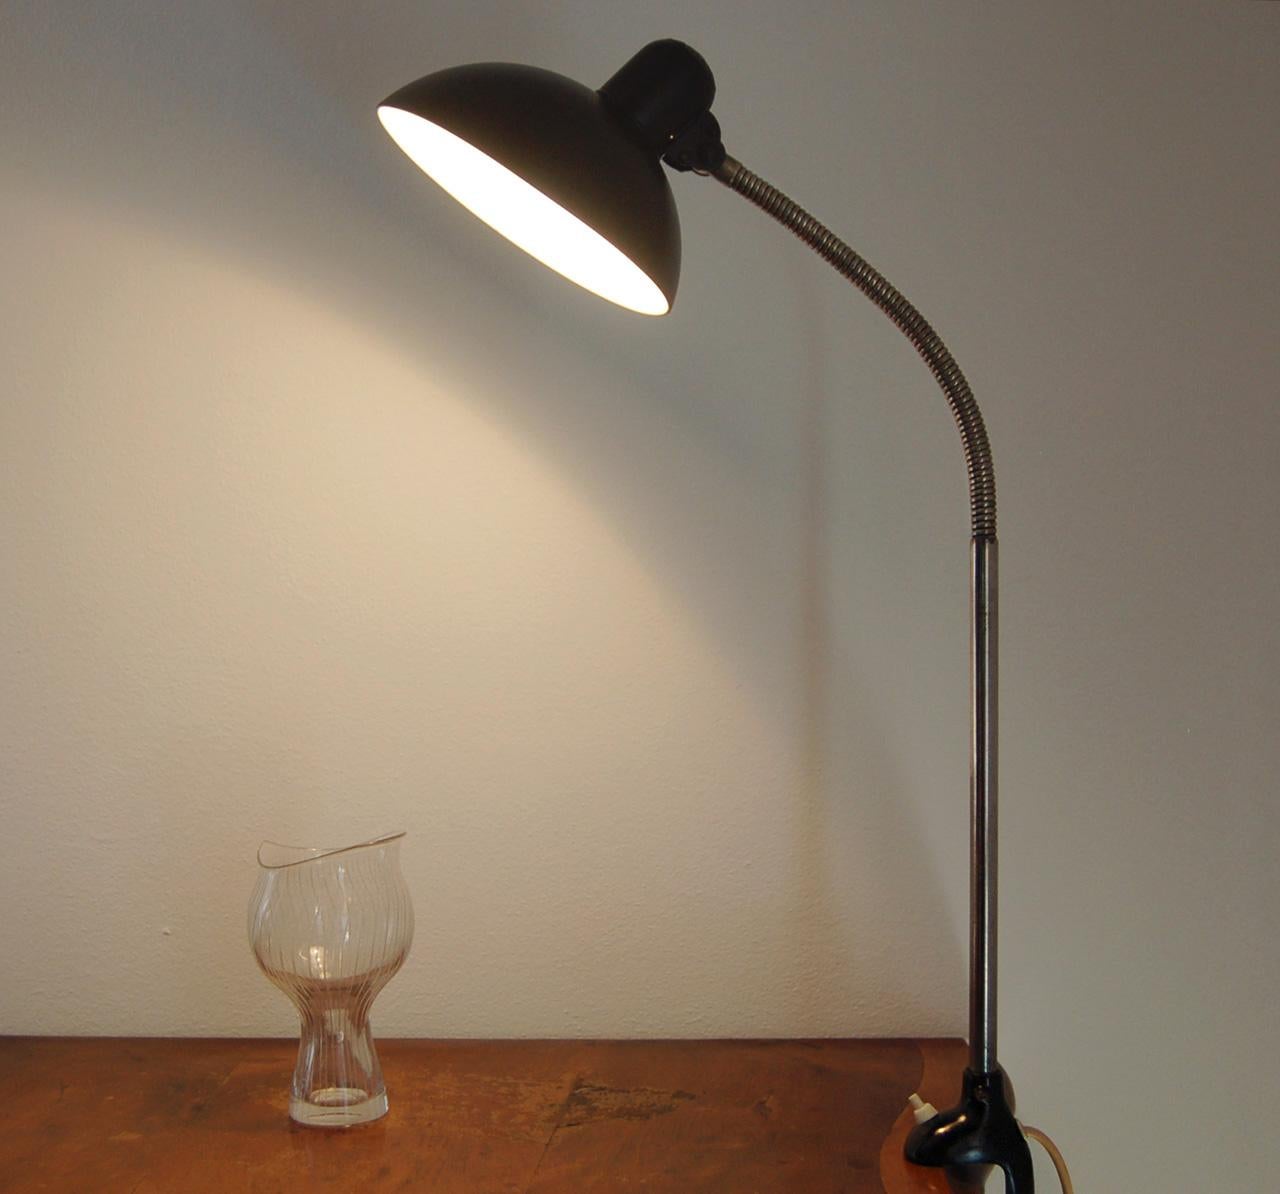 Bauhaus Kaiser Idell 6740 Adjustable Table Lamp by Christian Dell 1930s For Sale